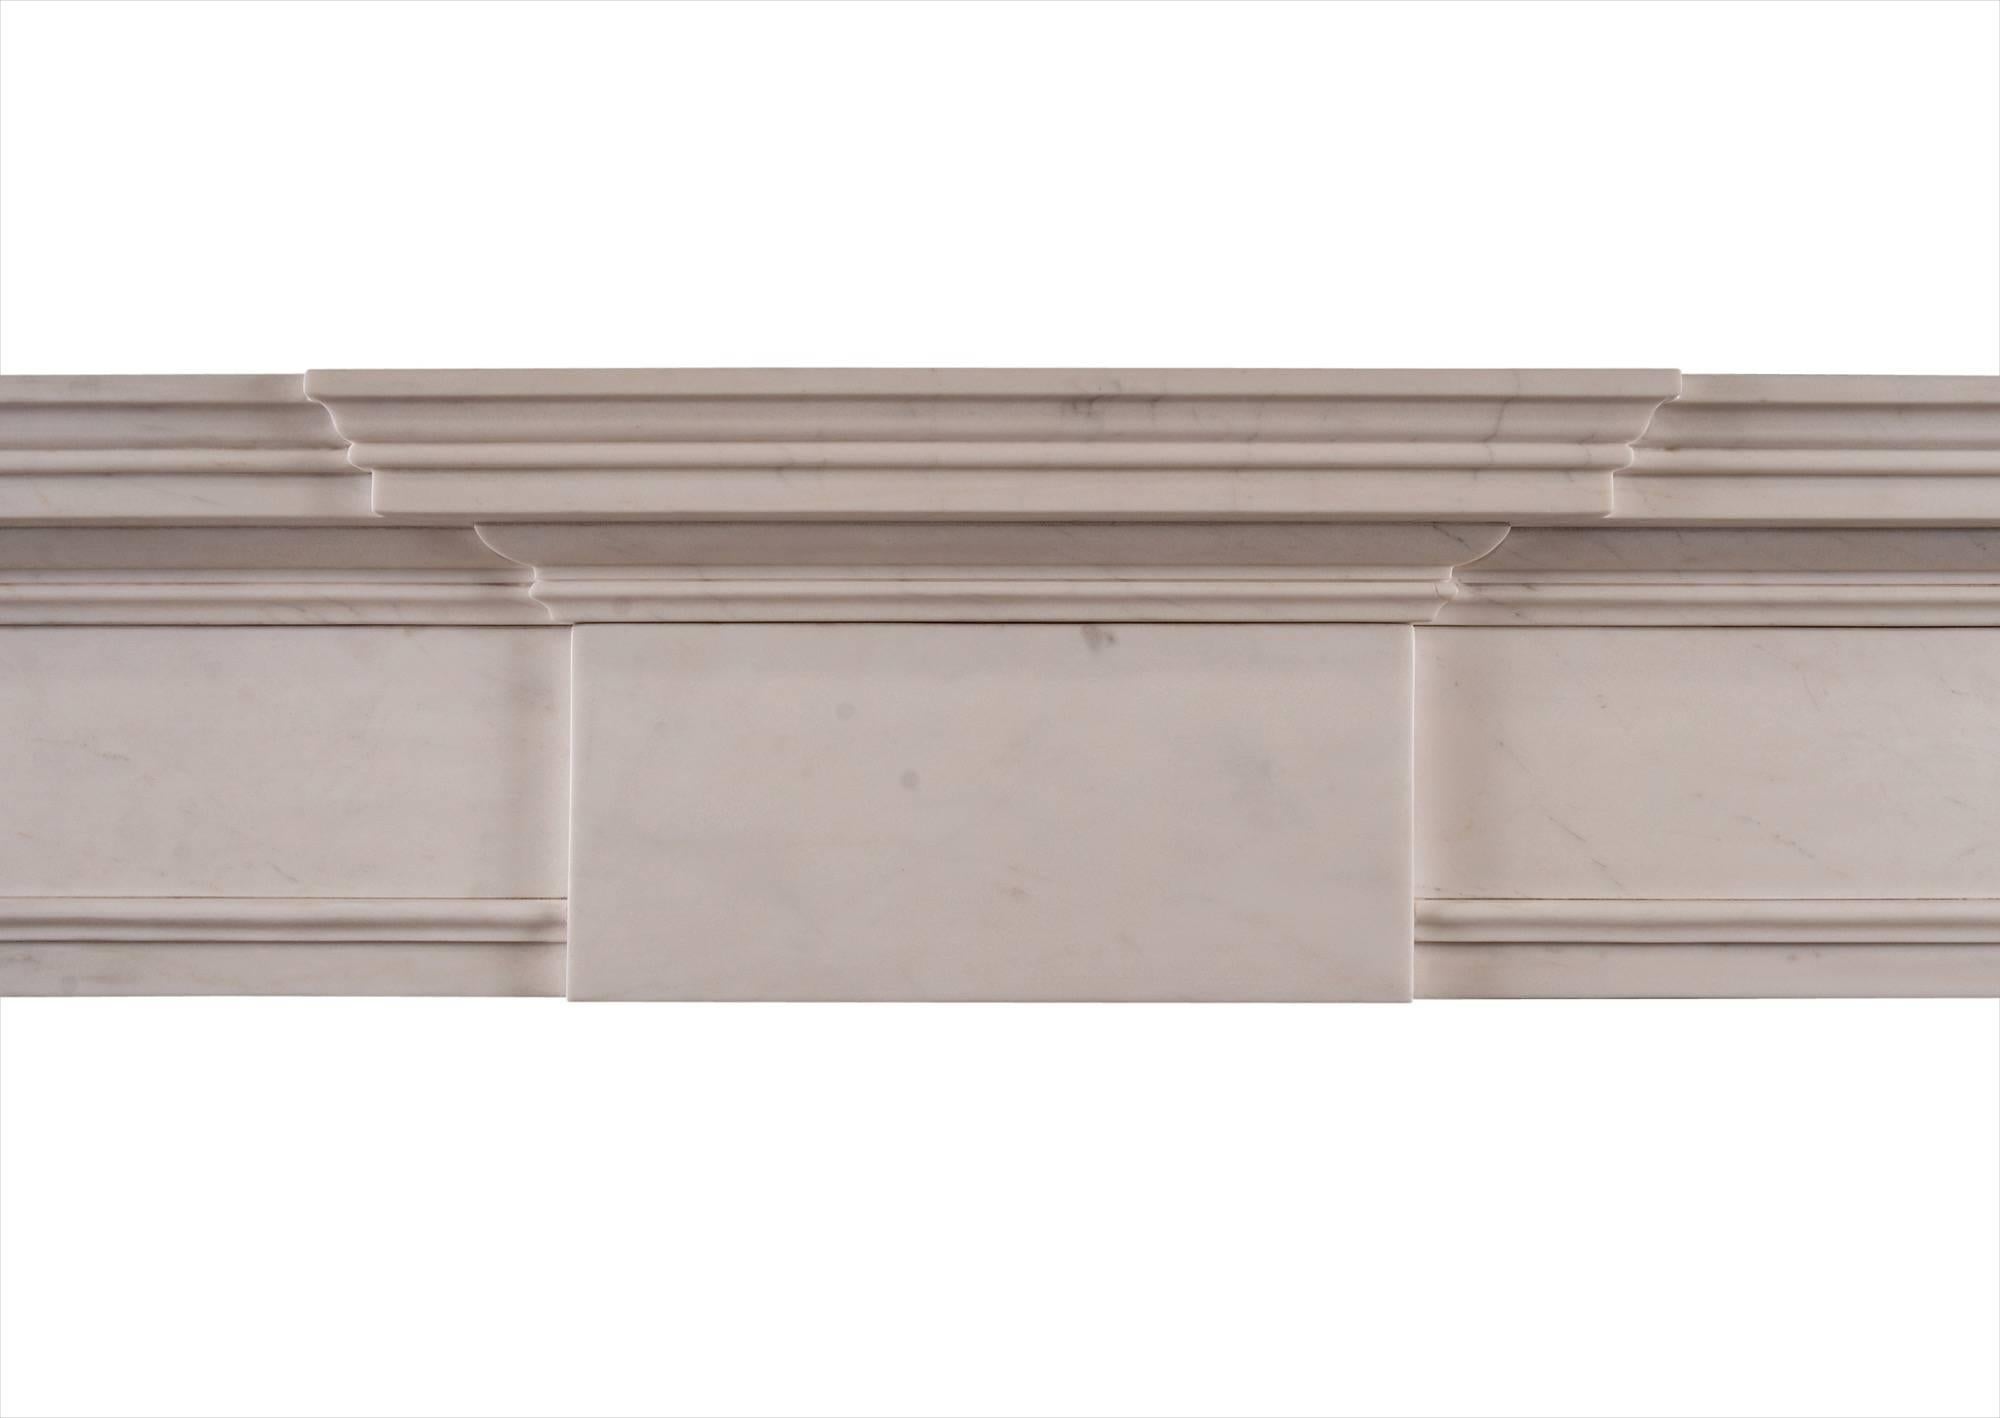 An English Georgian style fireplace. The plain jambs surmounted by scotia moulding and plain end blocks. The frieze with plain centre panel with moulded shelf above. An attractively simple model in the classical style. Modern.

Measure: Shelf width